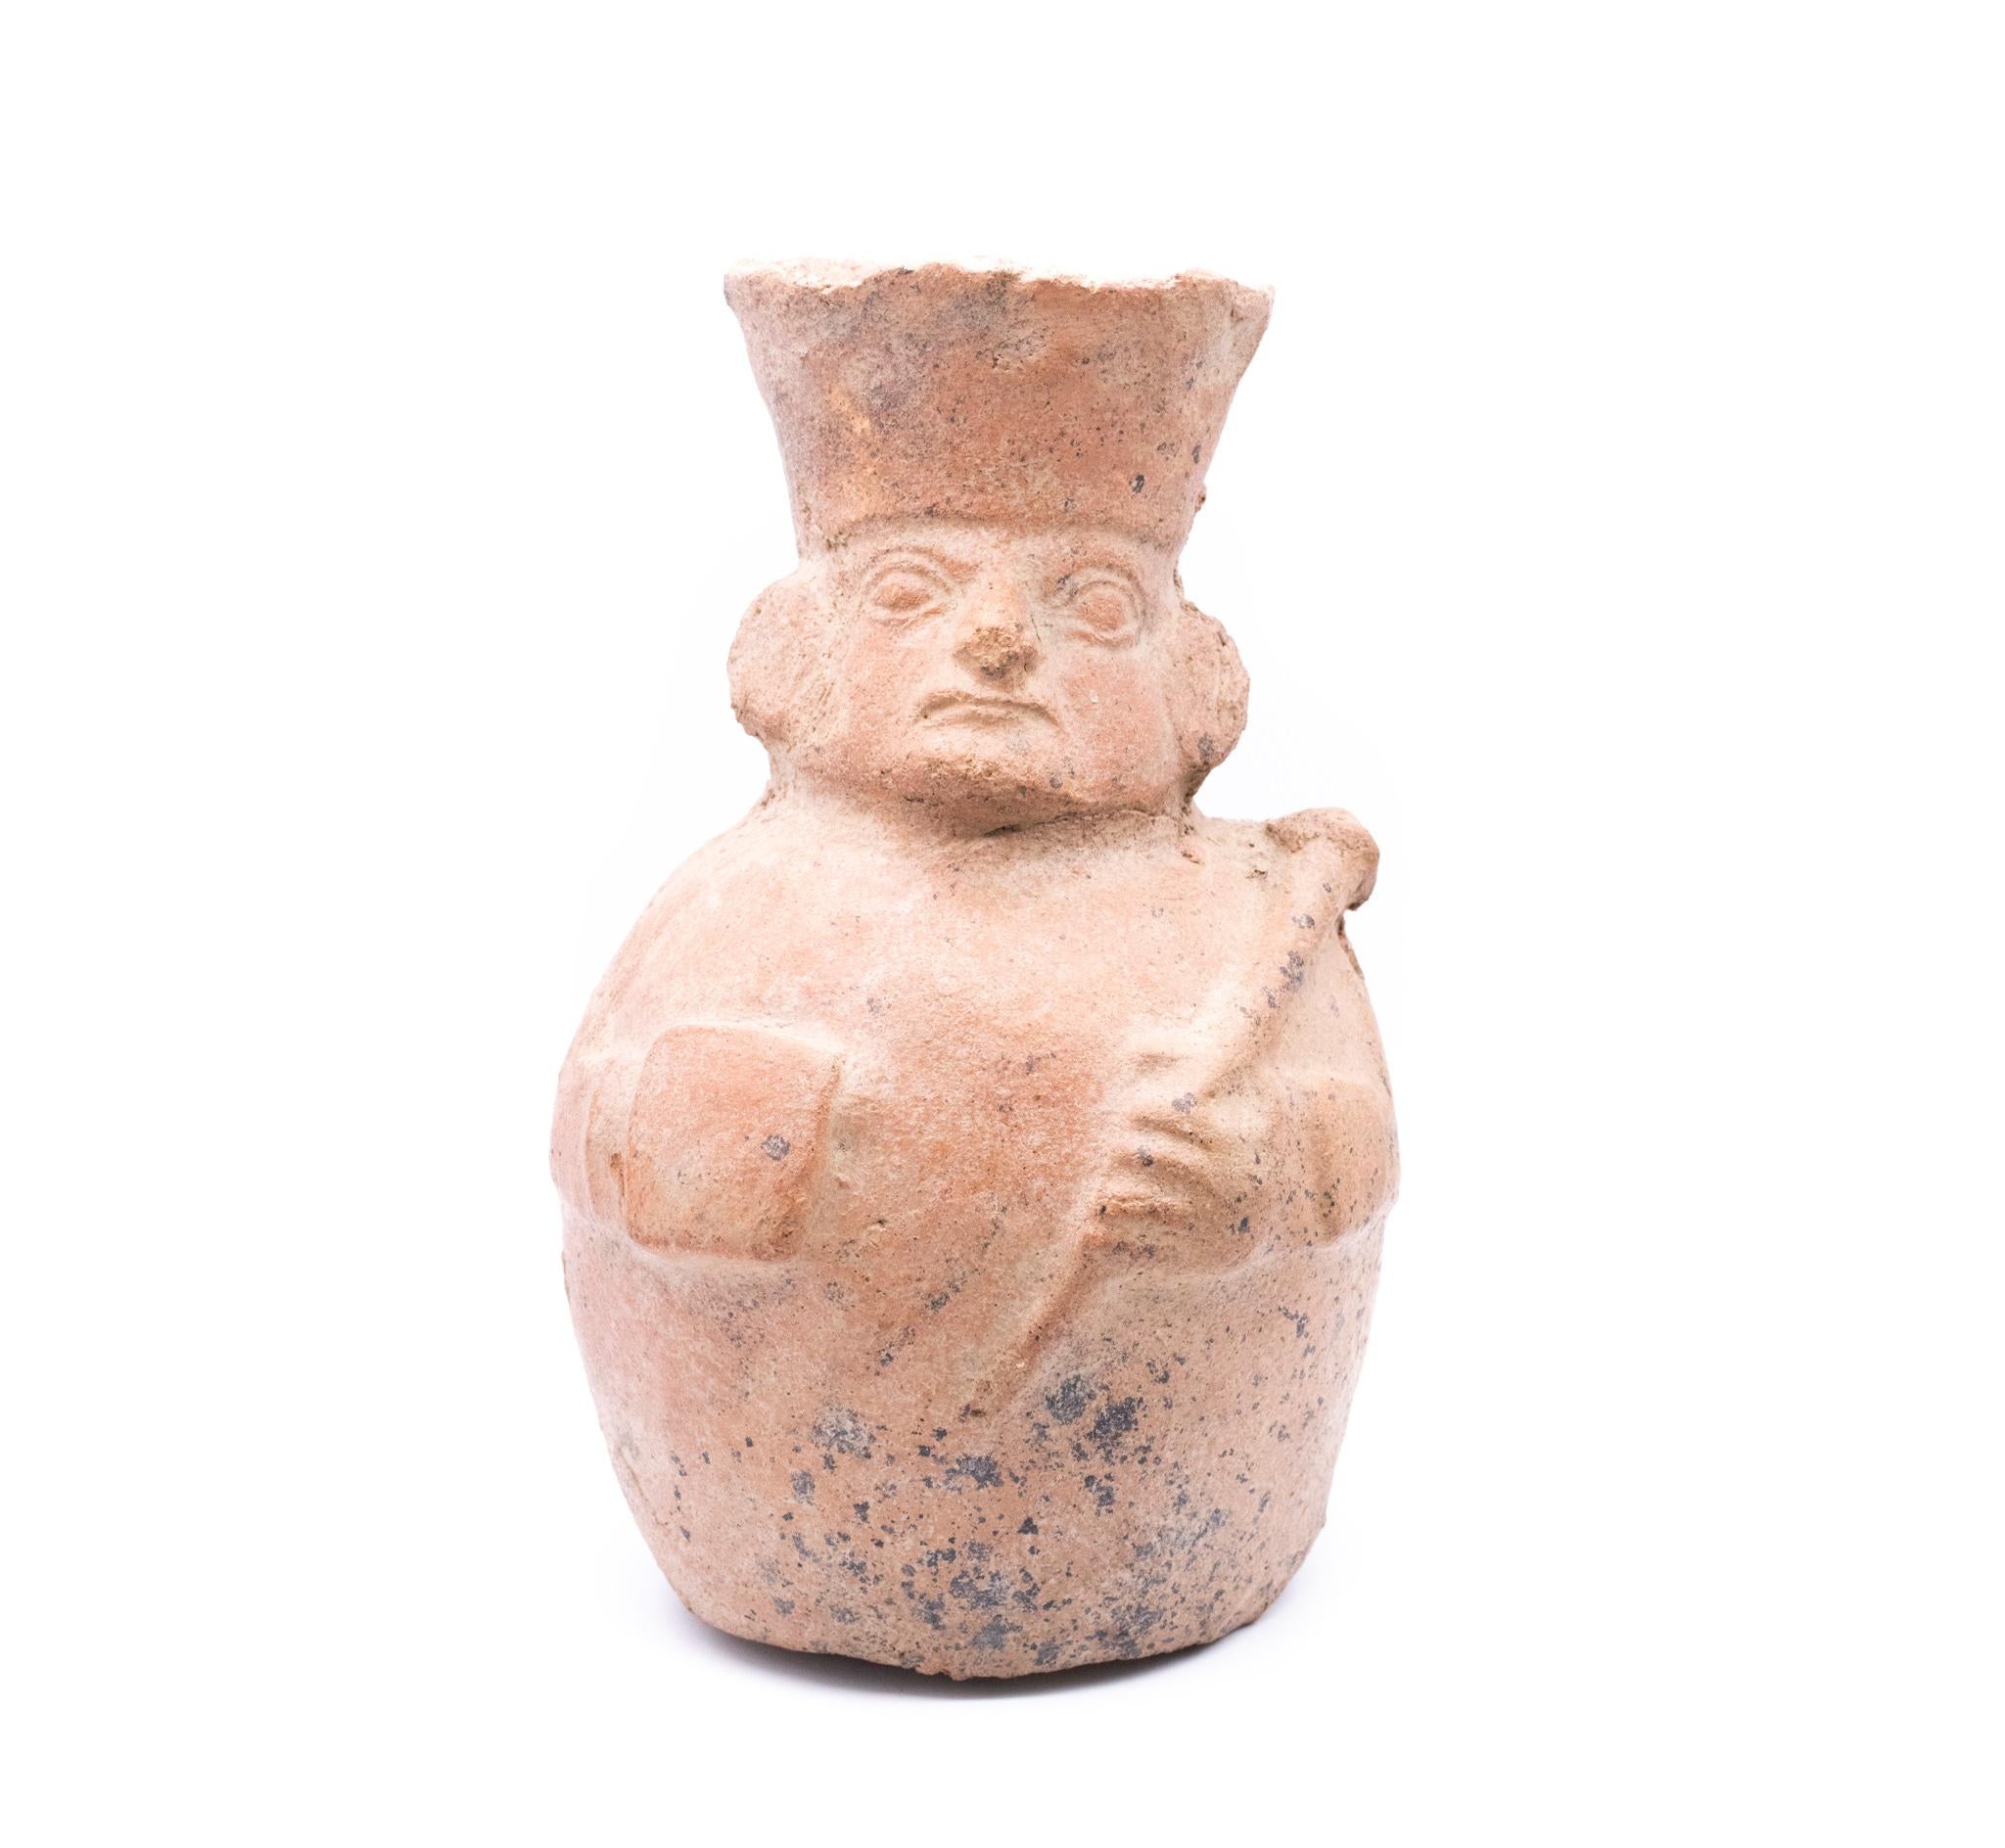 Rare pre Hispanic Moche culture, pre-Inca earthenware vessel.

A beautiful interesting piece, created in the southern Peru region around the 100-700 AD by the Moche culture. This rare early period face-neck vessel has been crafted from red earth